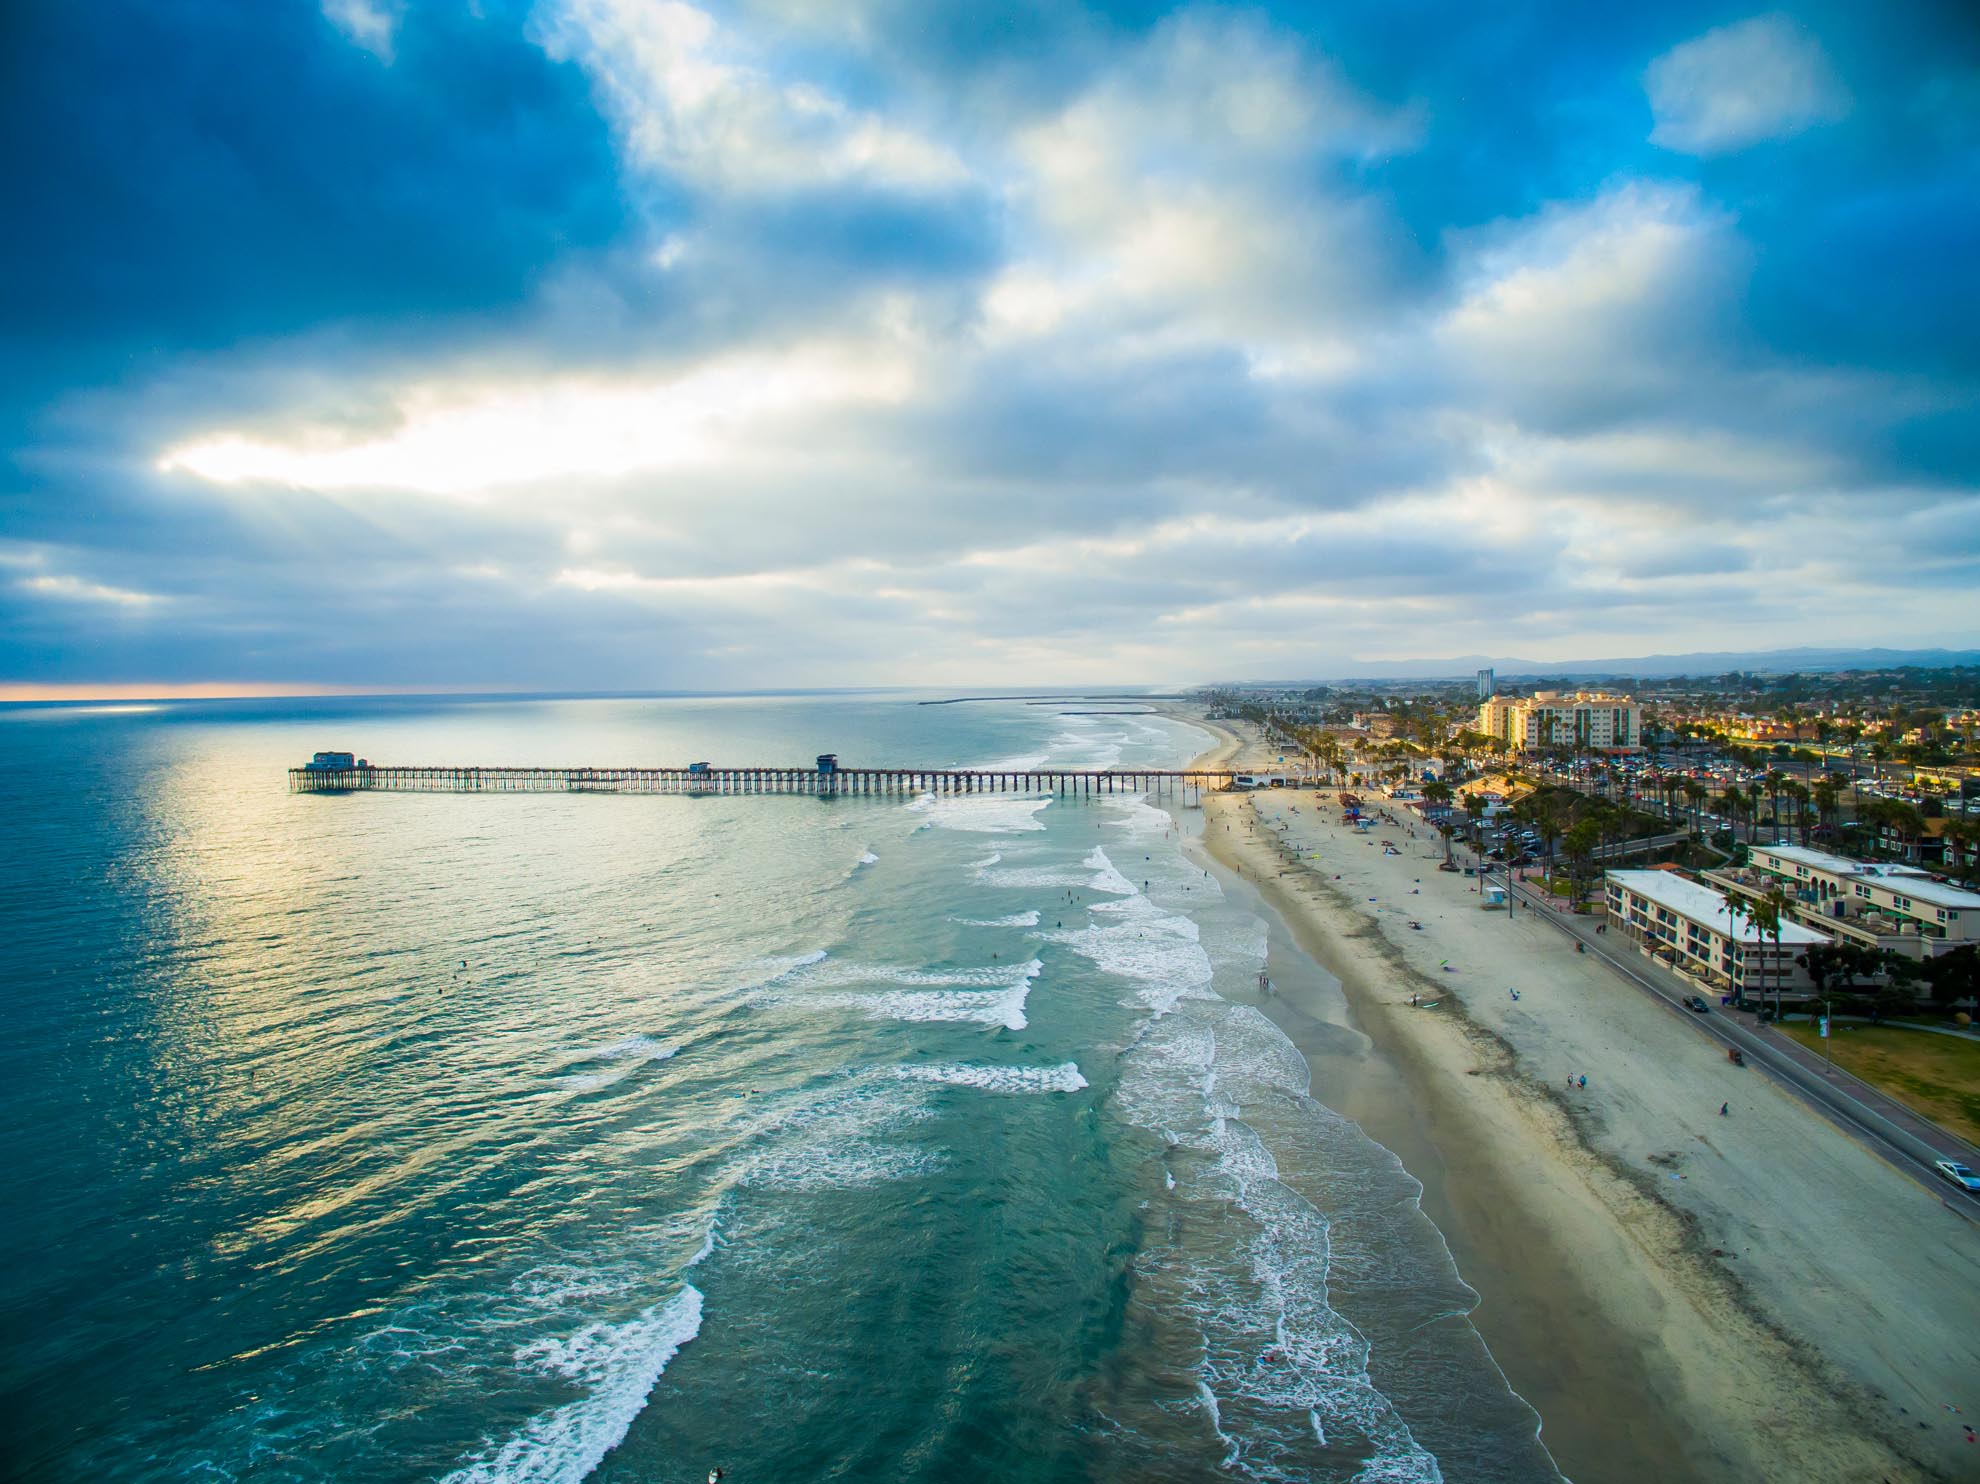 Photograph of Oceanside Pier at sunset Oceanside California taken from a drone